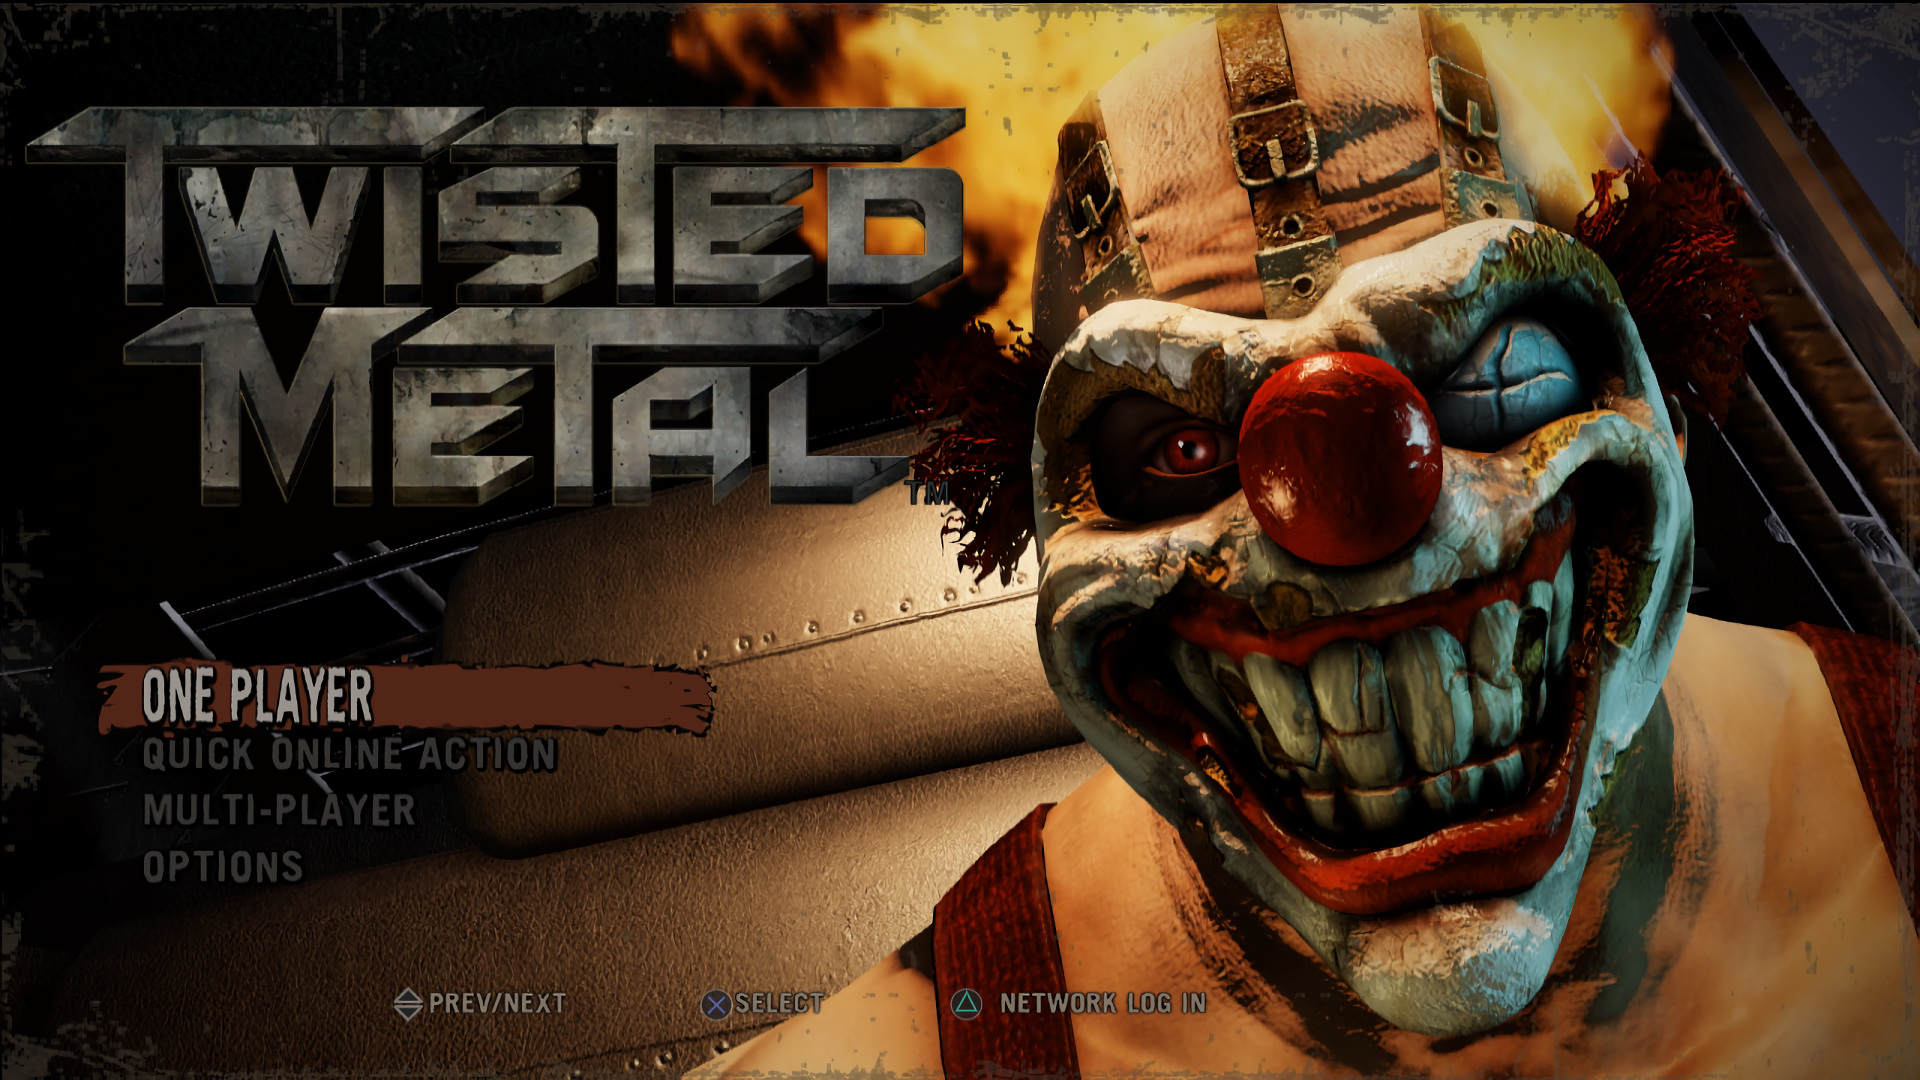 Twisted Metal PS3 Gameplay - Classic Death Match - Sunsprings, CA